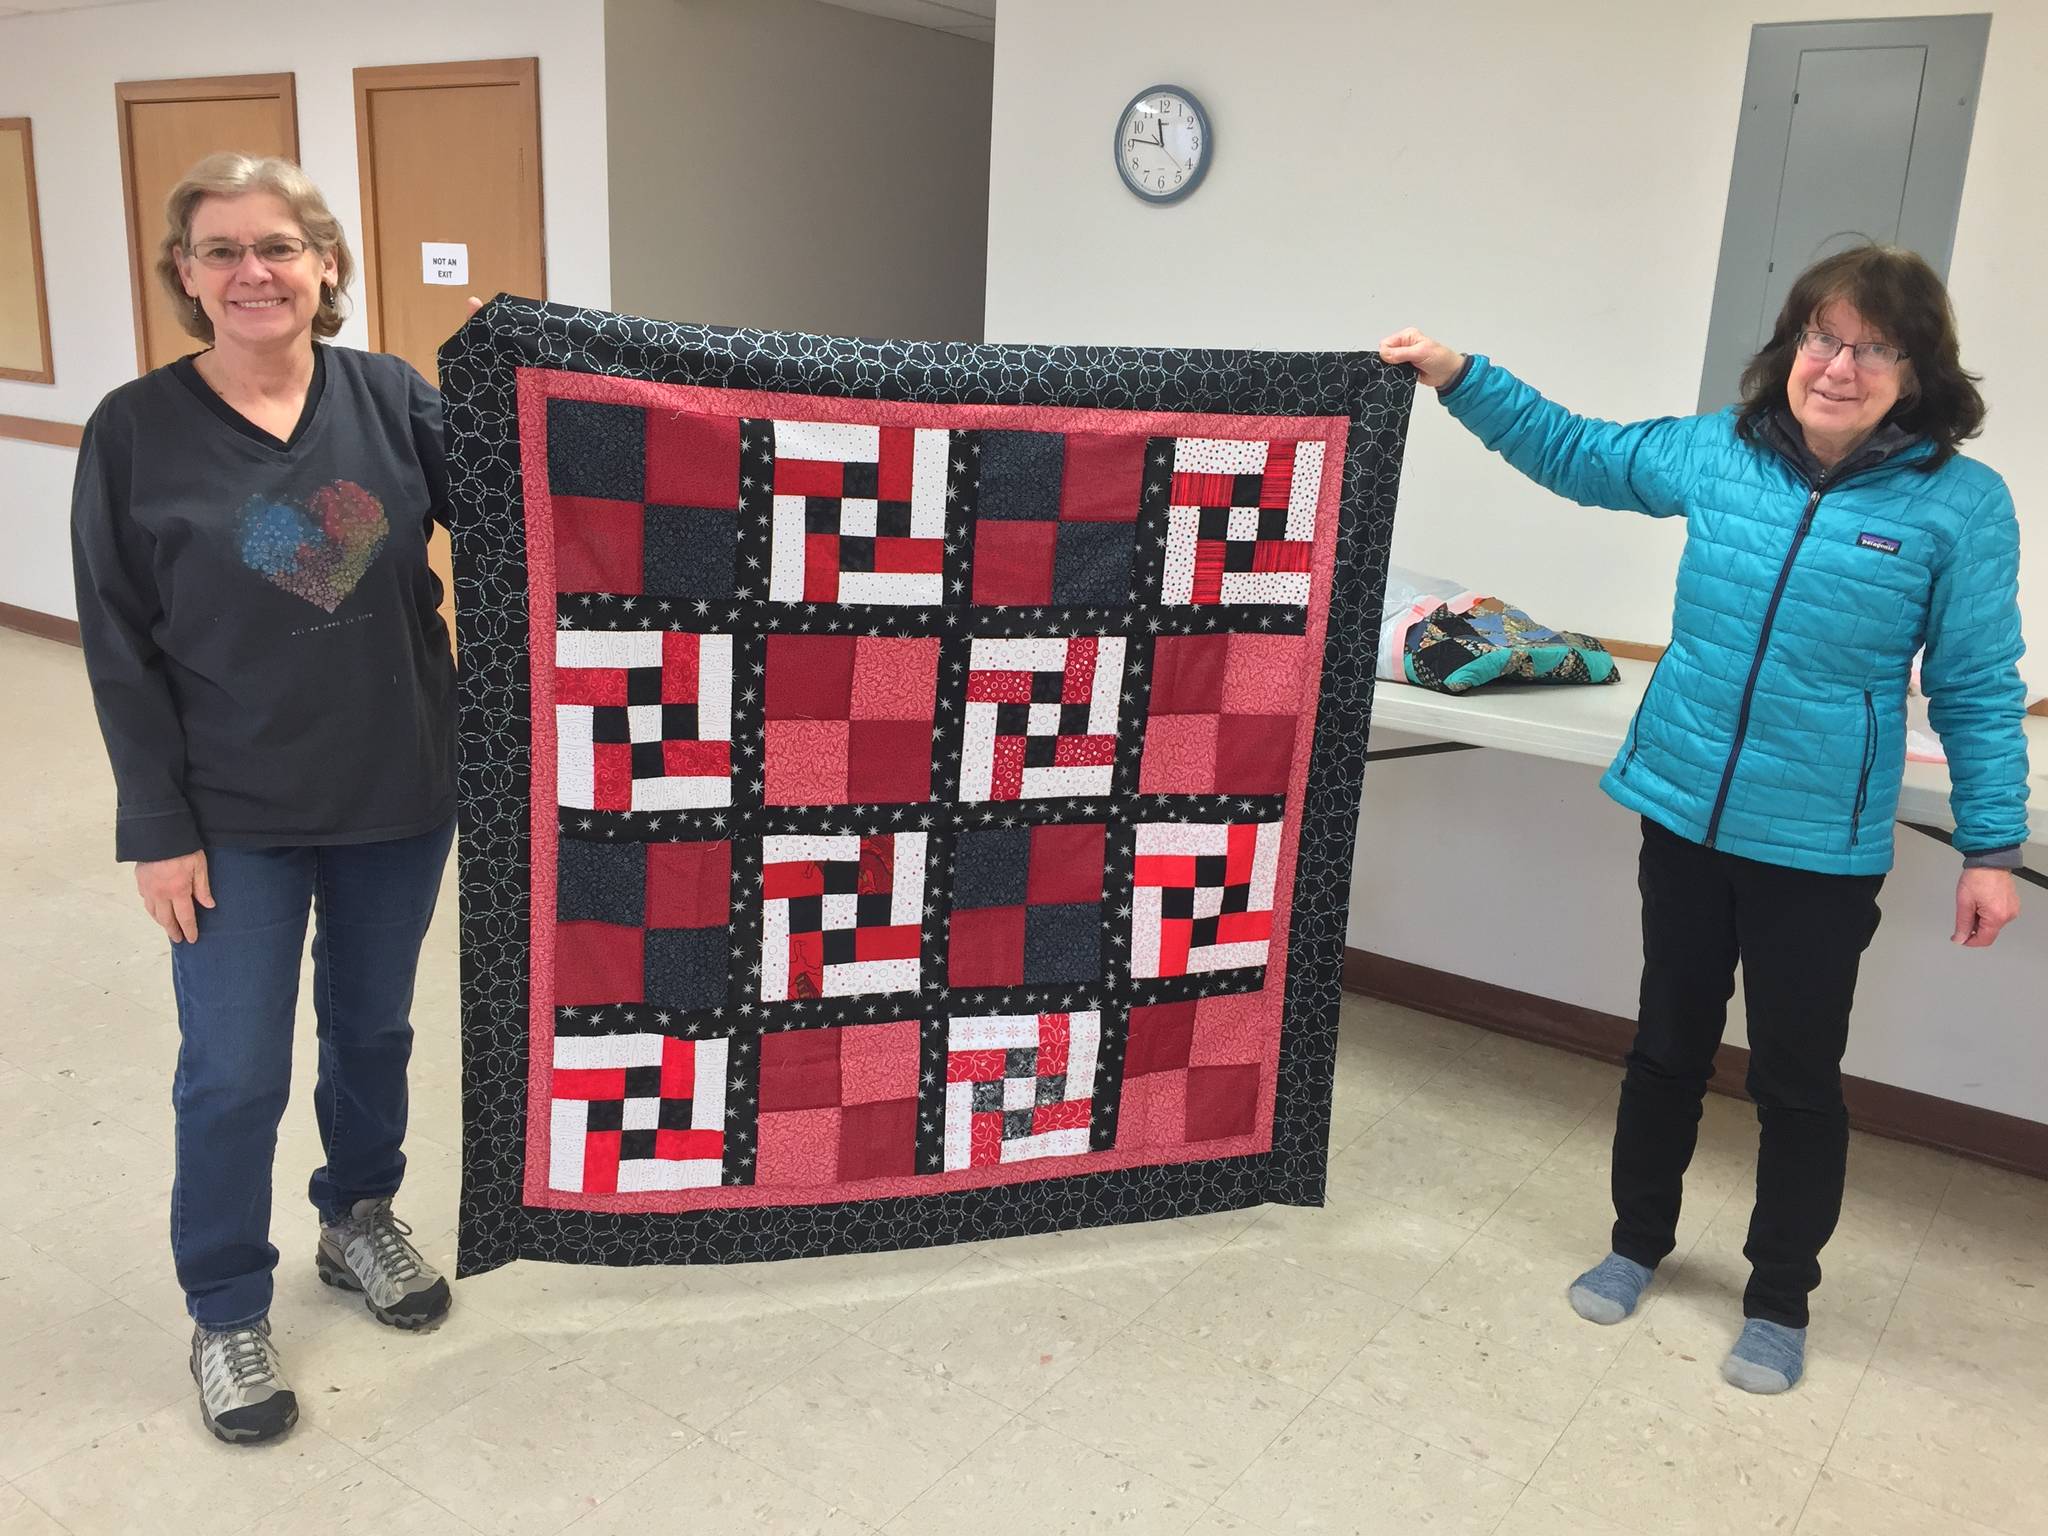 Members of the Kachemak Bay Quilters work with their quilts (Photo provided)